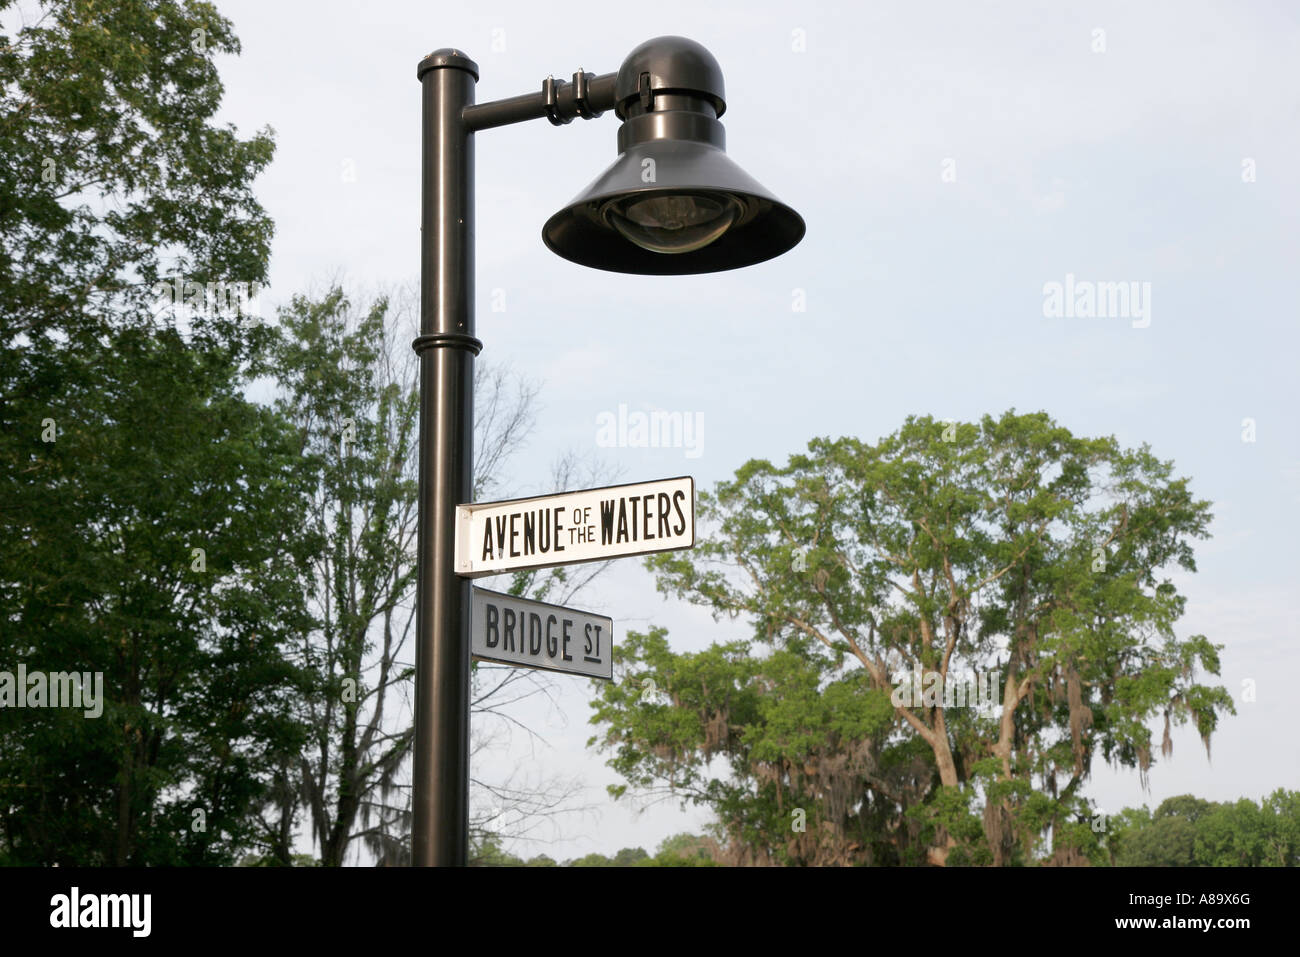 Alabama Pike Road,The Waters,planned community,street sign,lamppost,visitors travel traveling tour tourist tourism landmark landmarks culture cultural Stock Photo